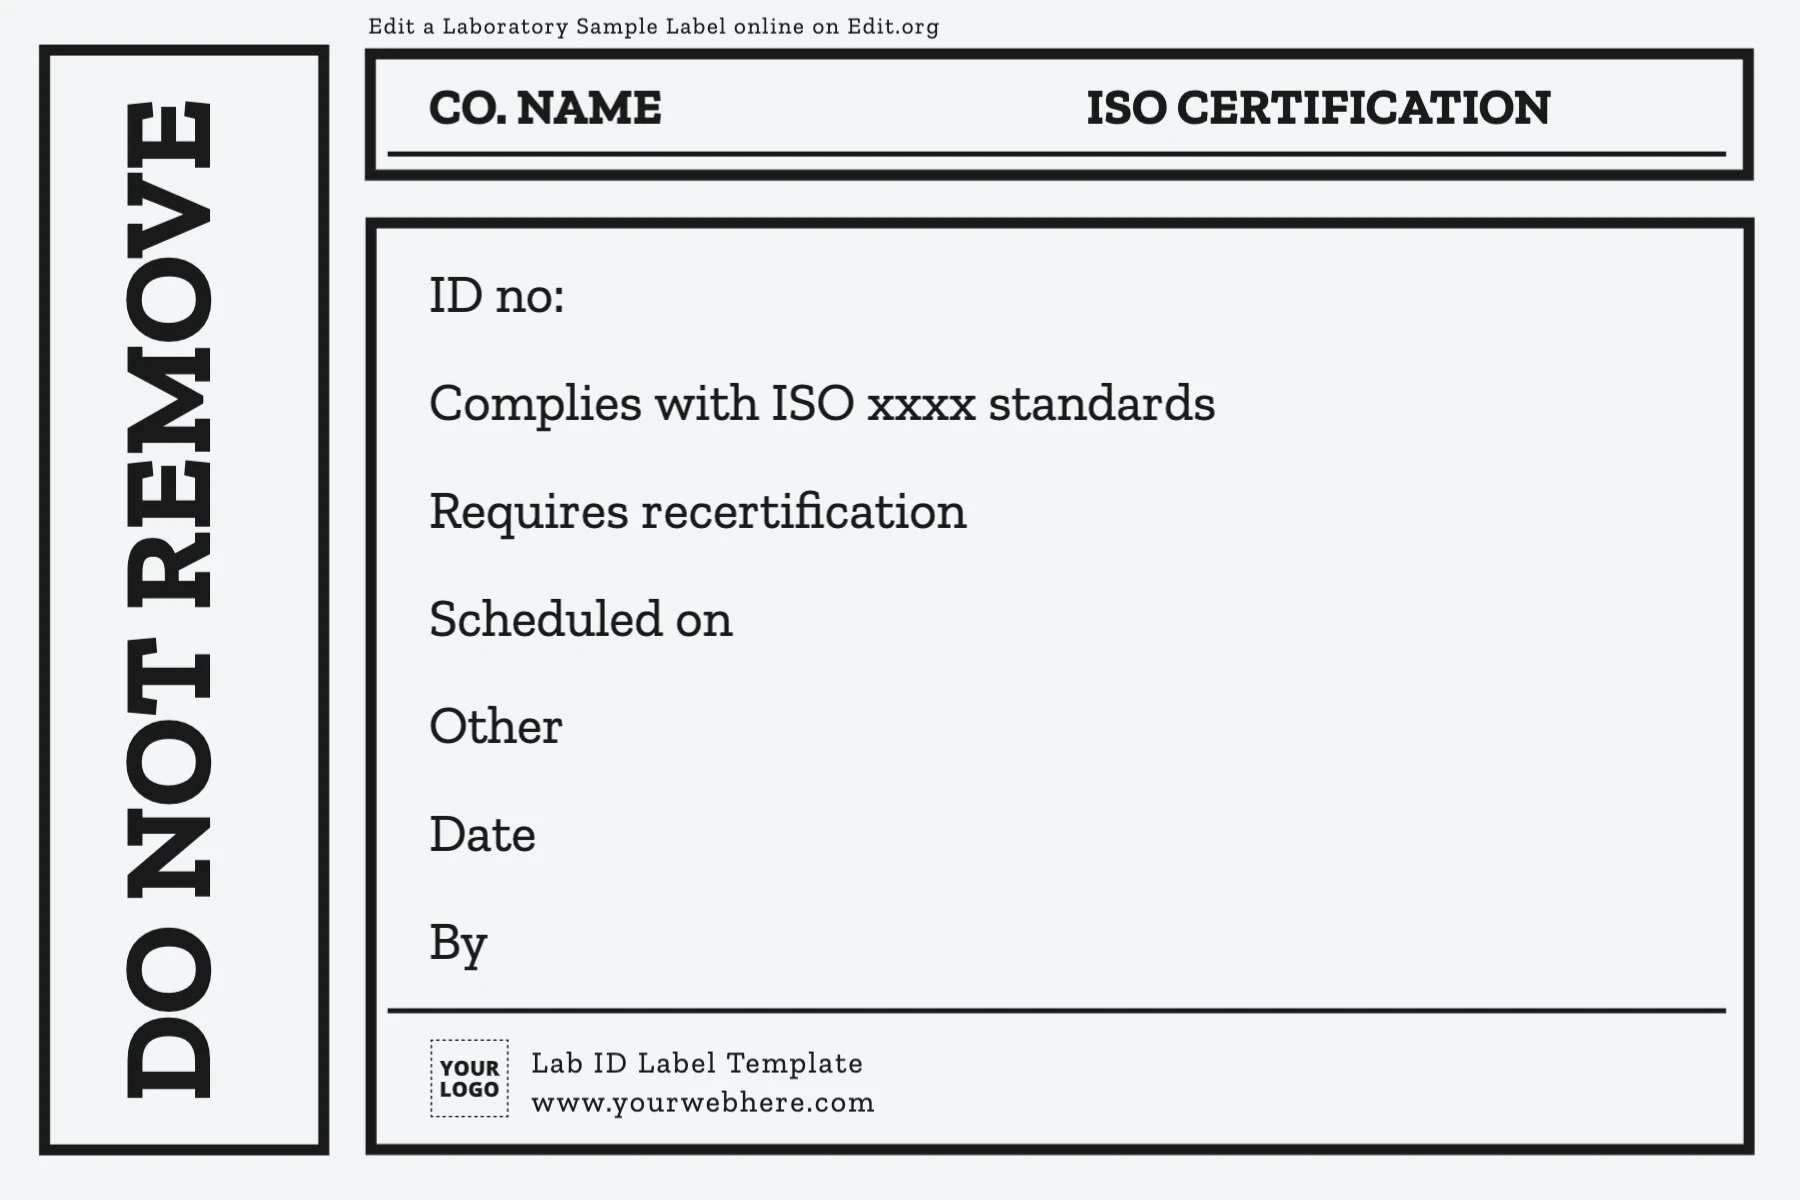 Customizable Lab Sample ID Label template online